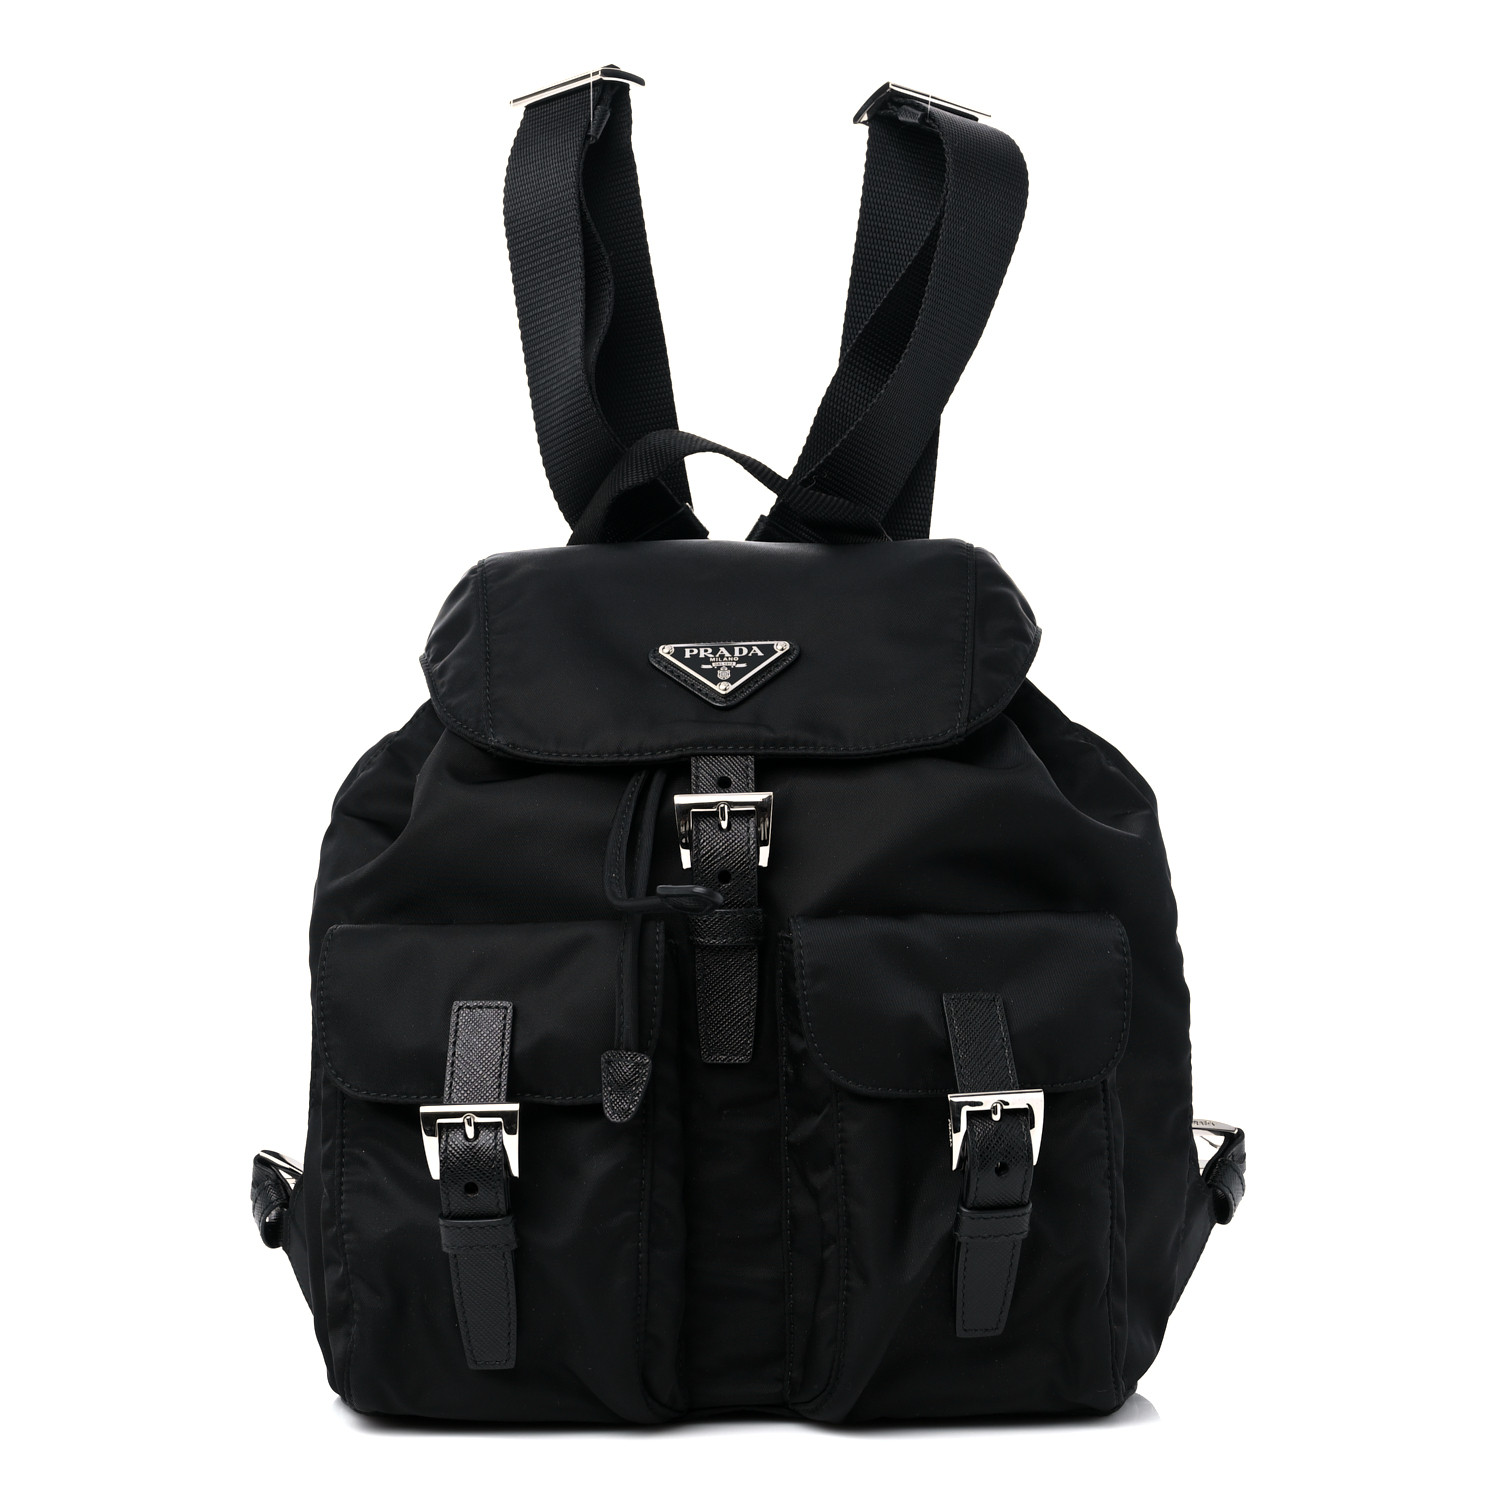 front view image of a PRADA Tessuto Nylon Vela Small Backpack in the color Black by FASHIONPHILE